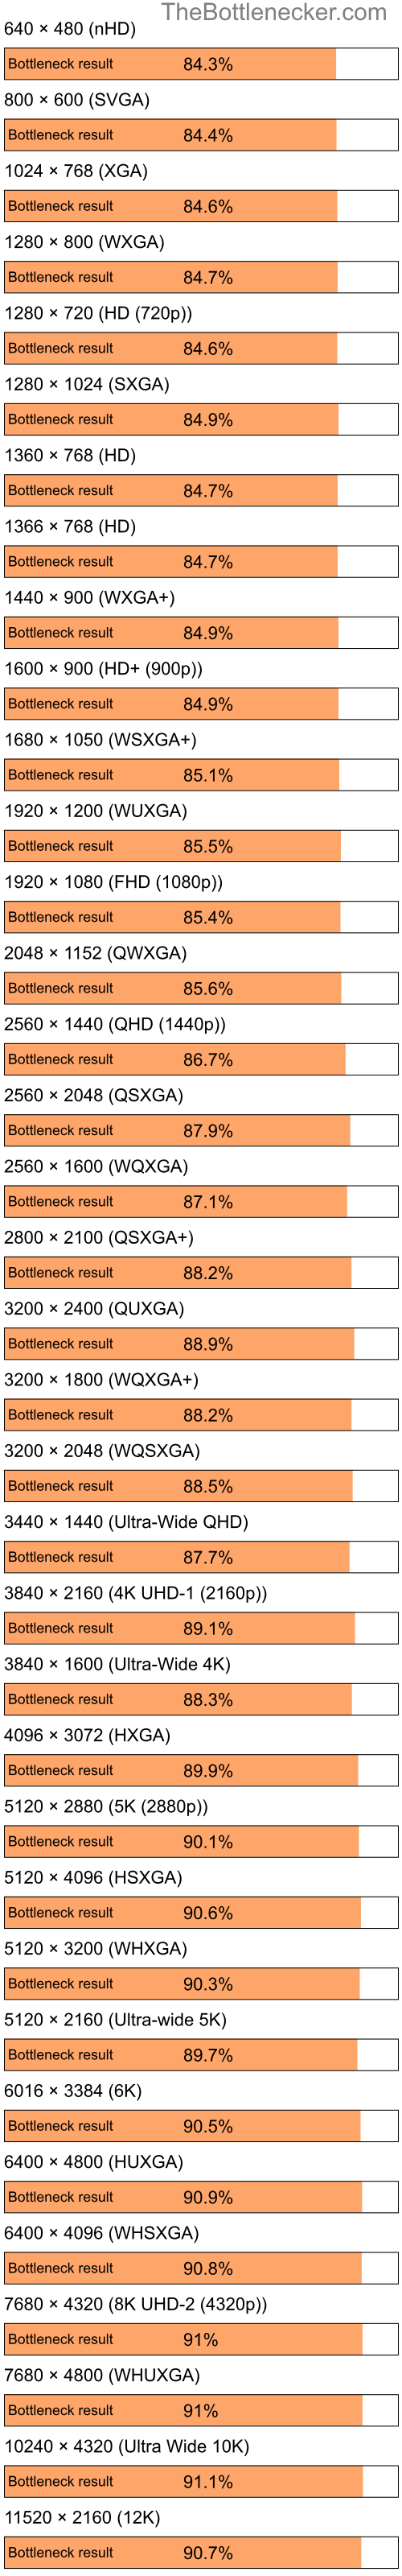 Bottleneck results by resolution for Intel Pentium 4 and NVIDIA GeForce4 Ti 4600 in Processor Intense Tasks